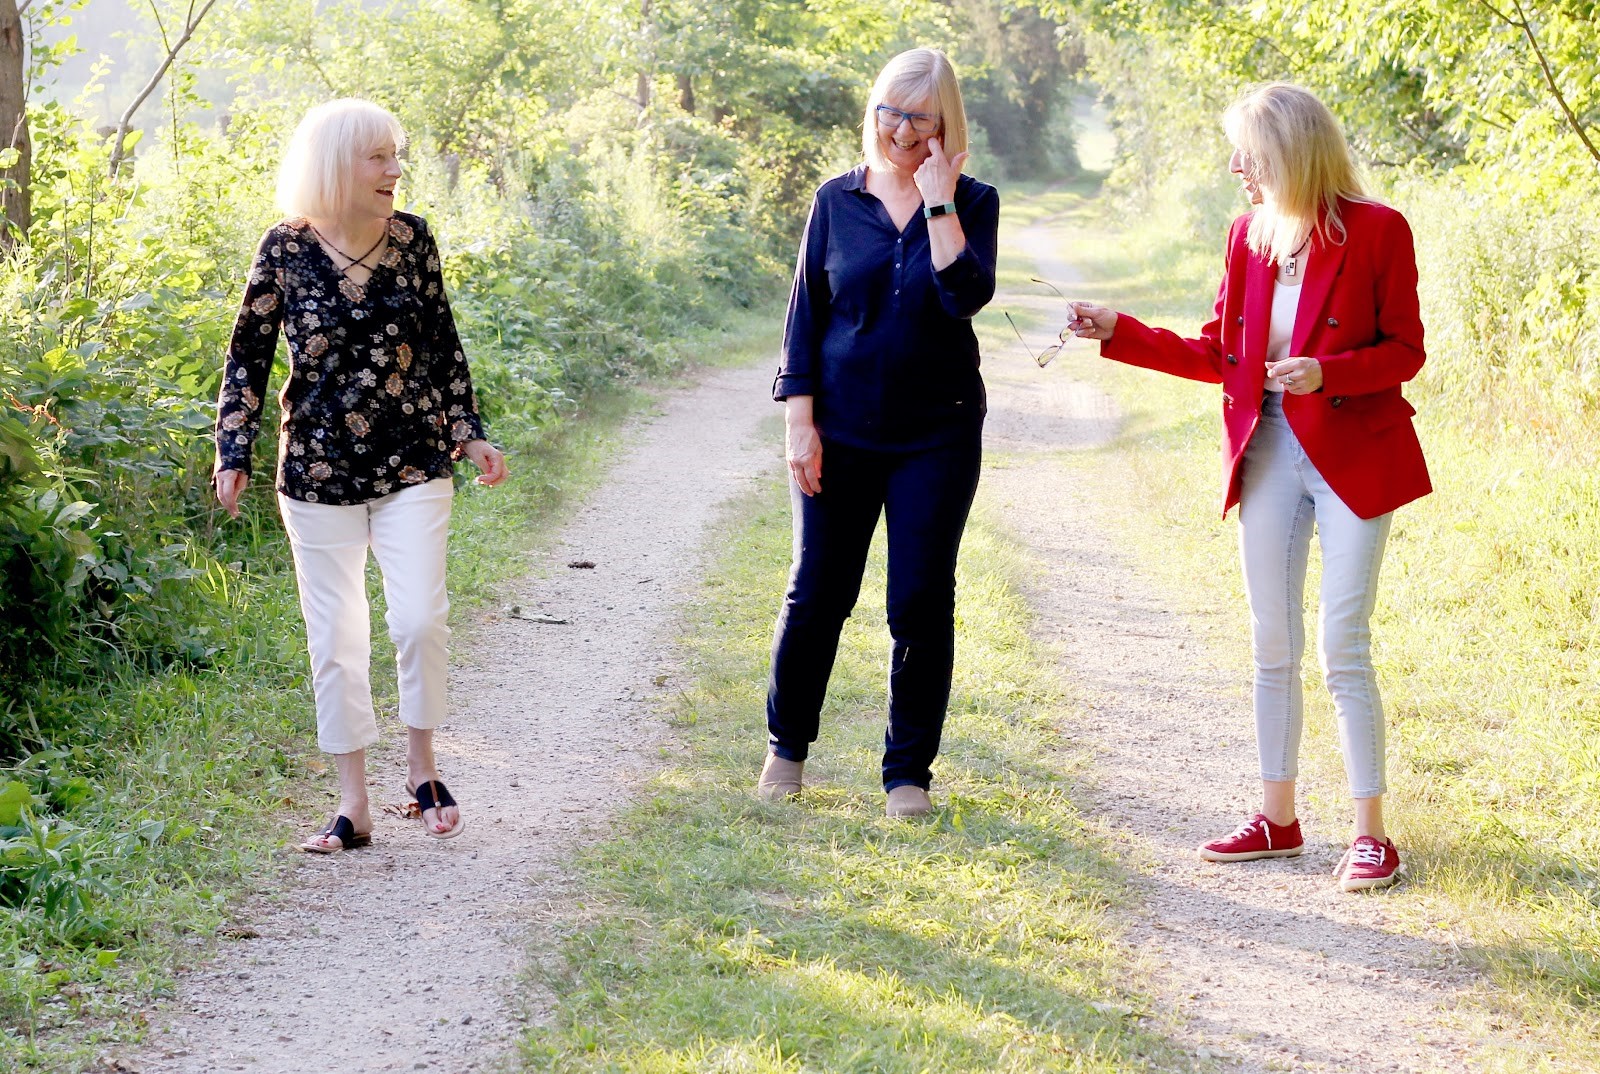 Three women with white hair walk together, laughing and smiling, on a path amongst trees.